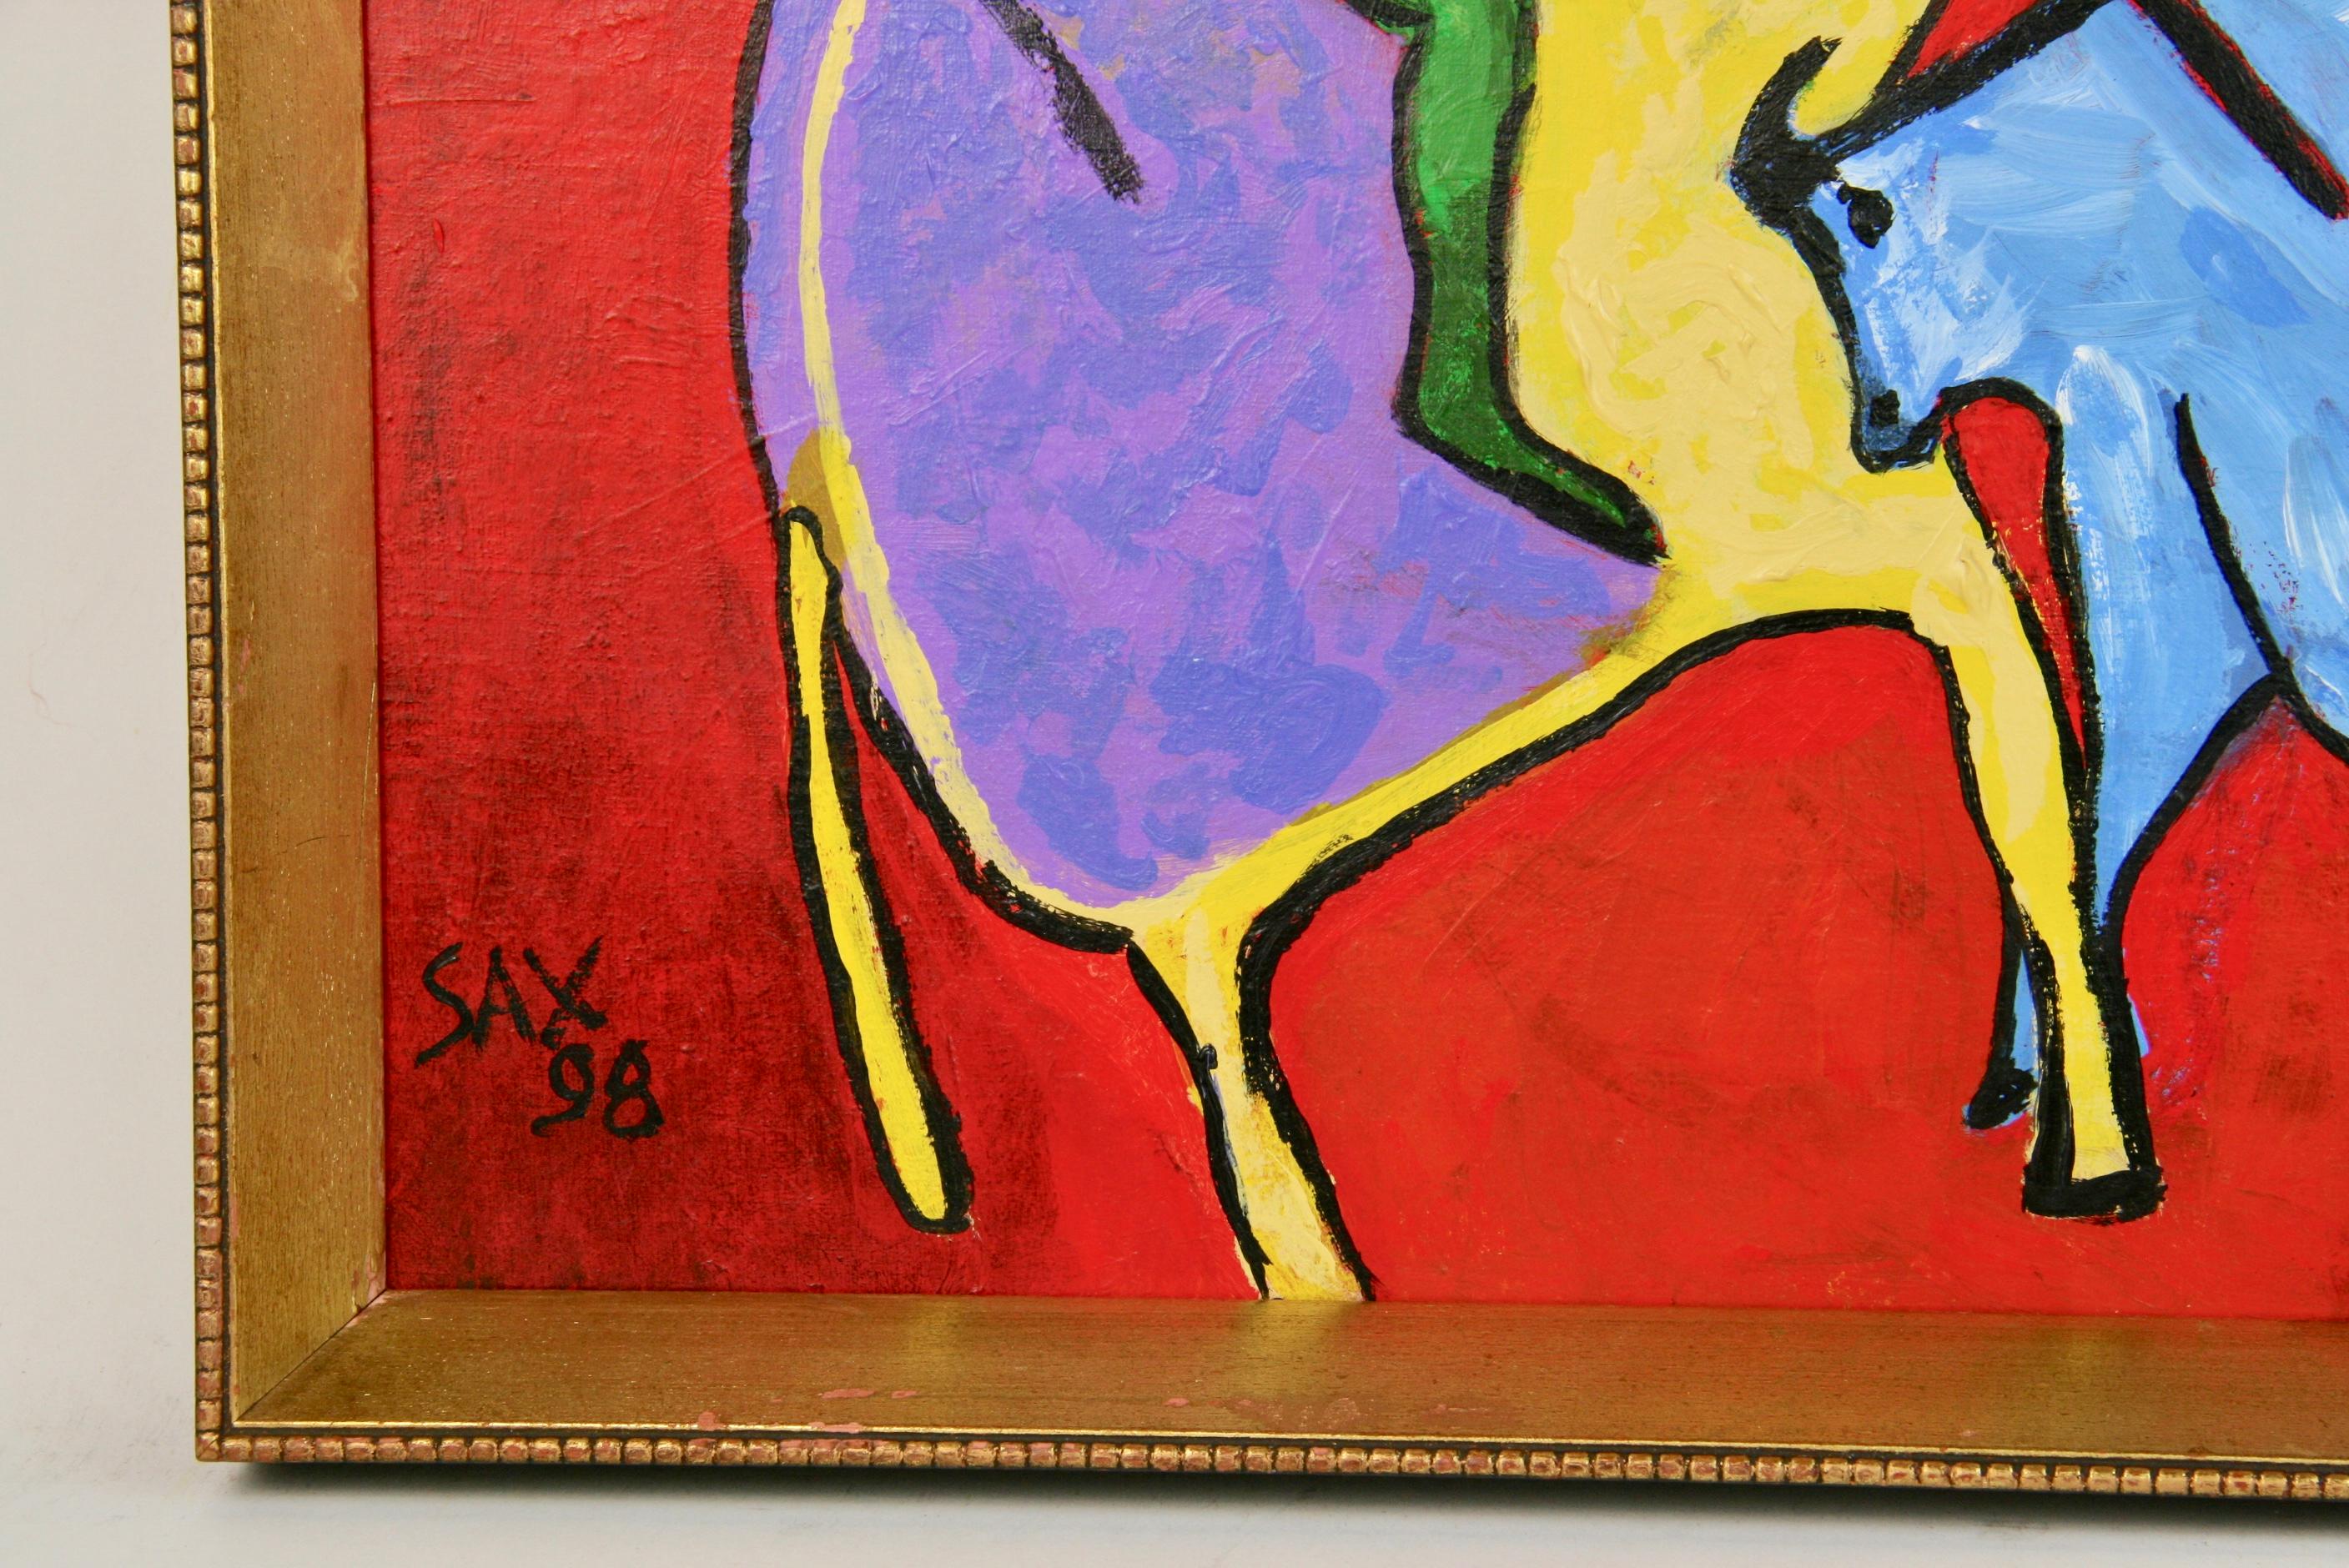 Fauvist Abstract Bull Fight - Painting by Sax